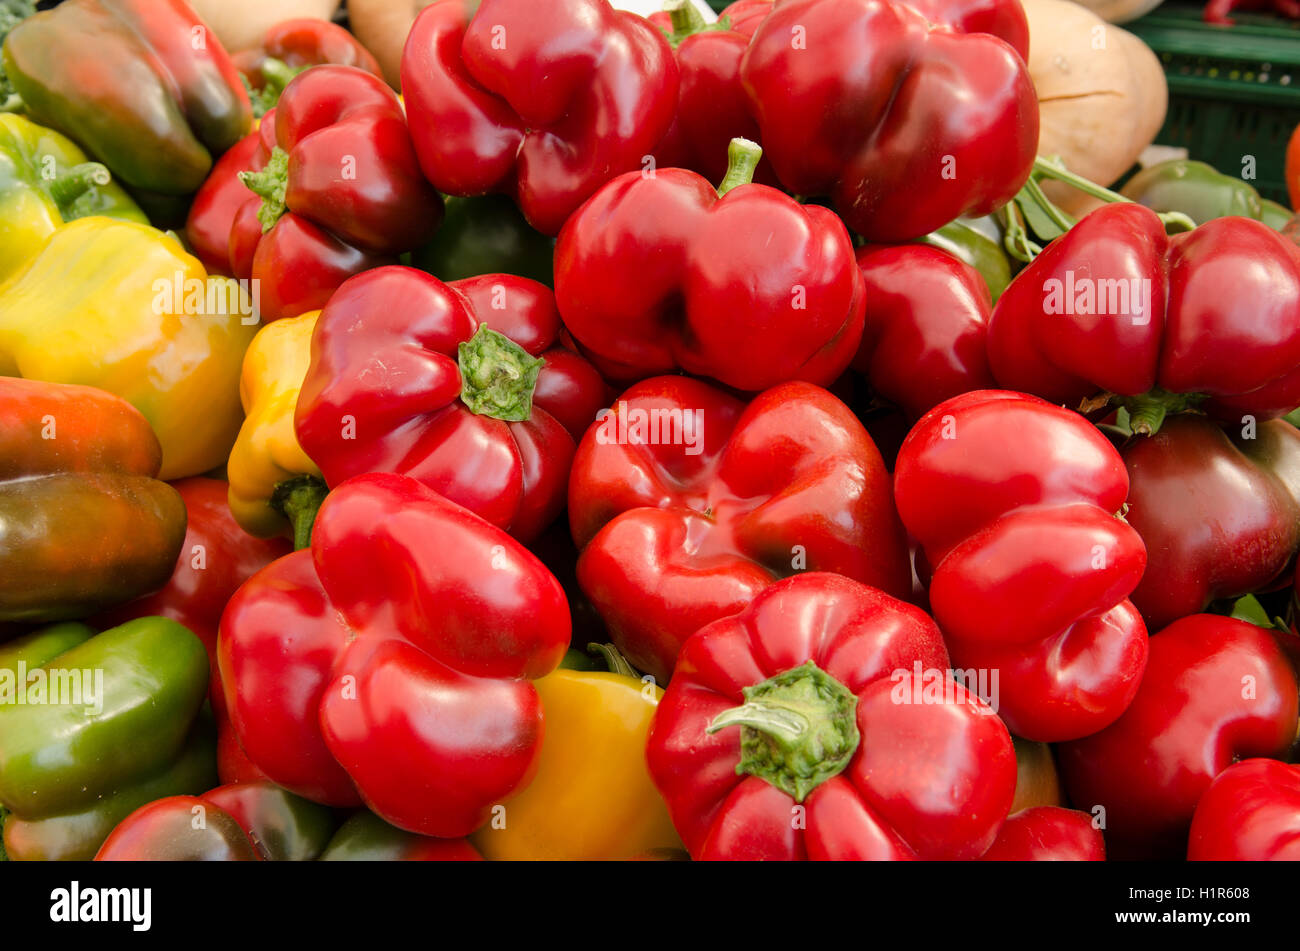 stack of bell peppers of various colors at a produce market Stock Photo